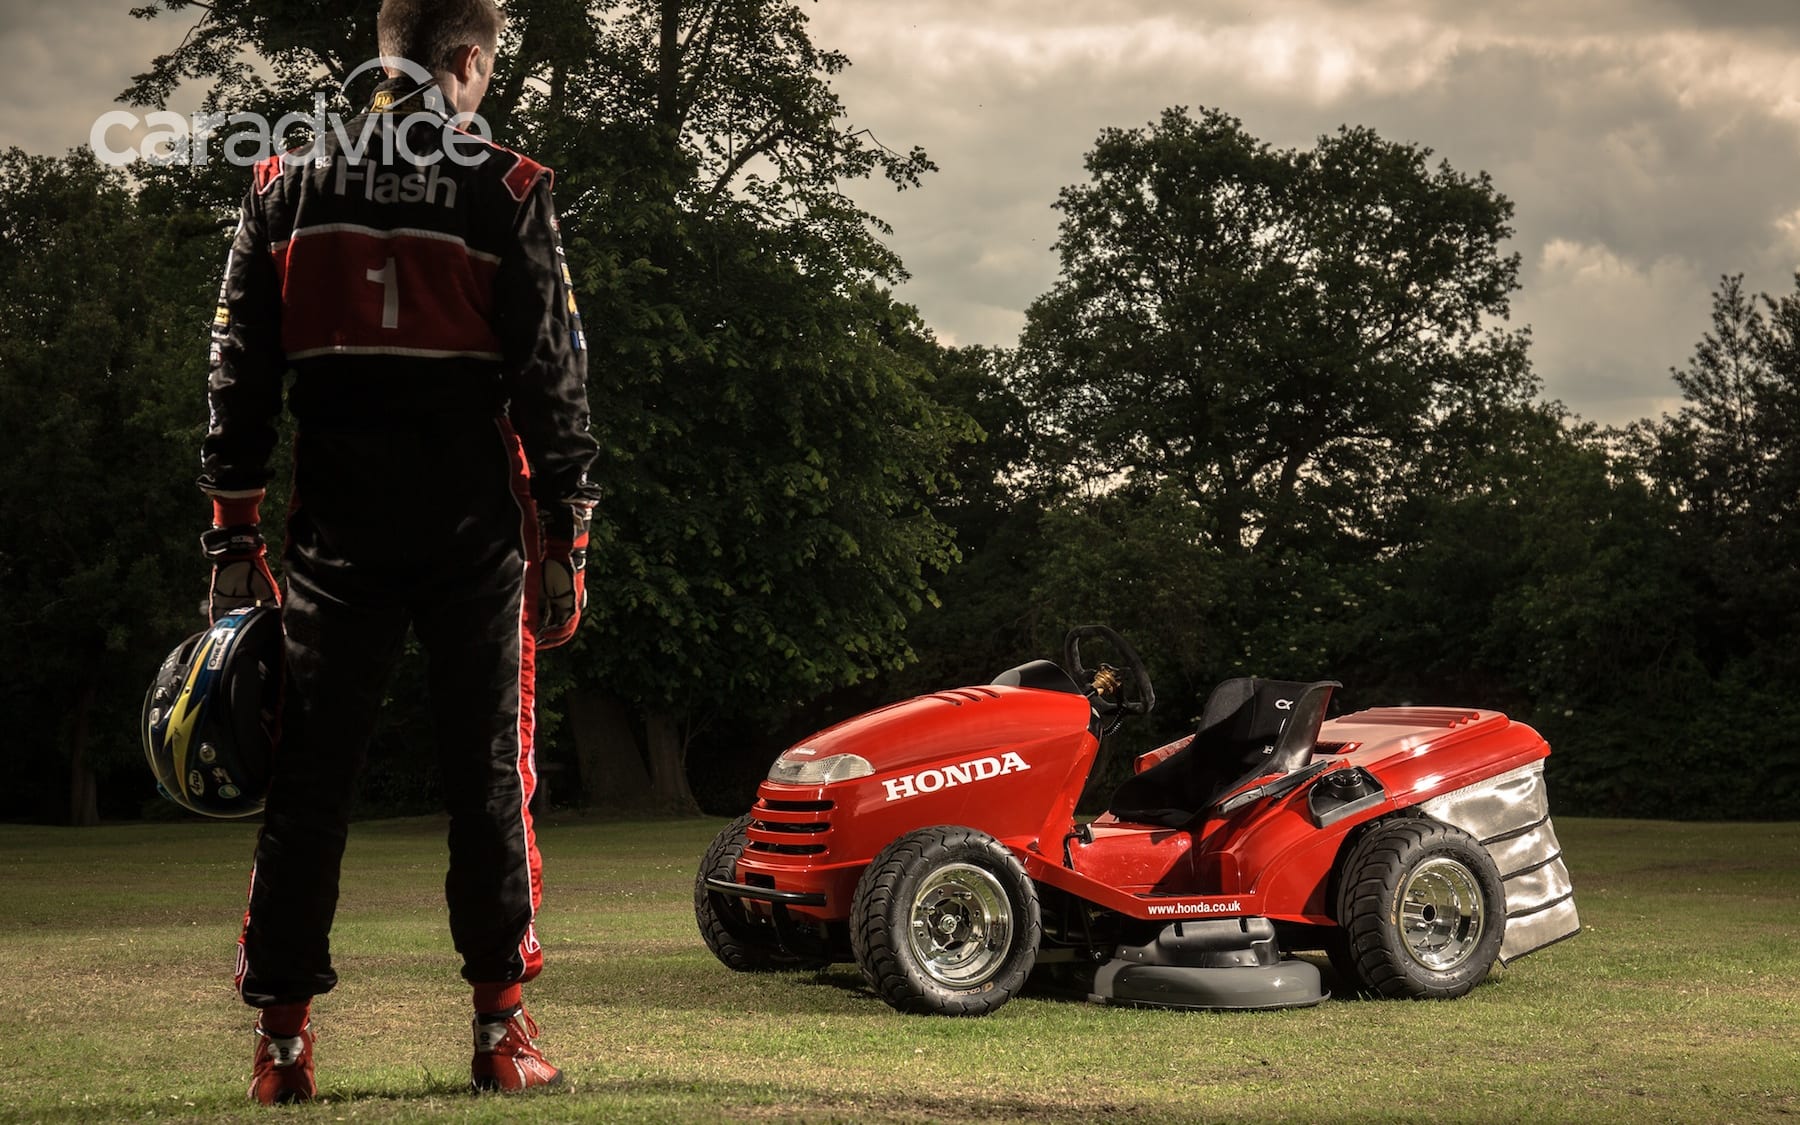 Honda Mean Mower Worlds Fastest Lawn Mower Does 0 100km H In 4sec